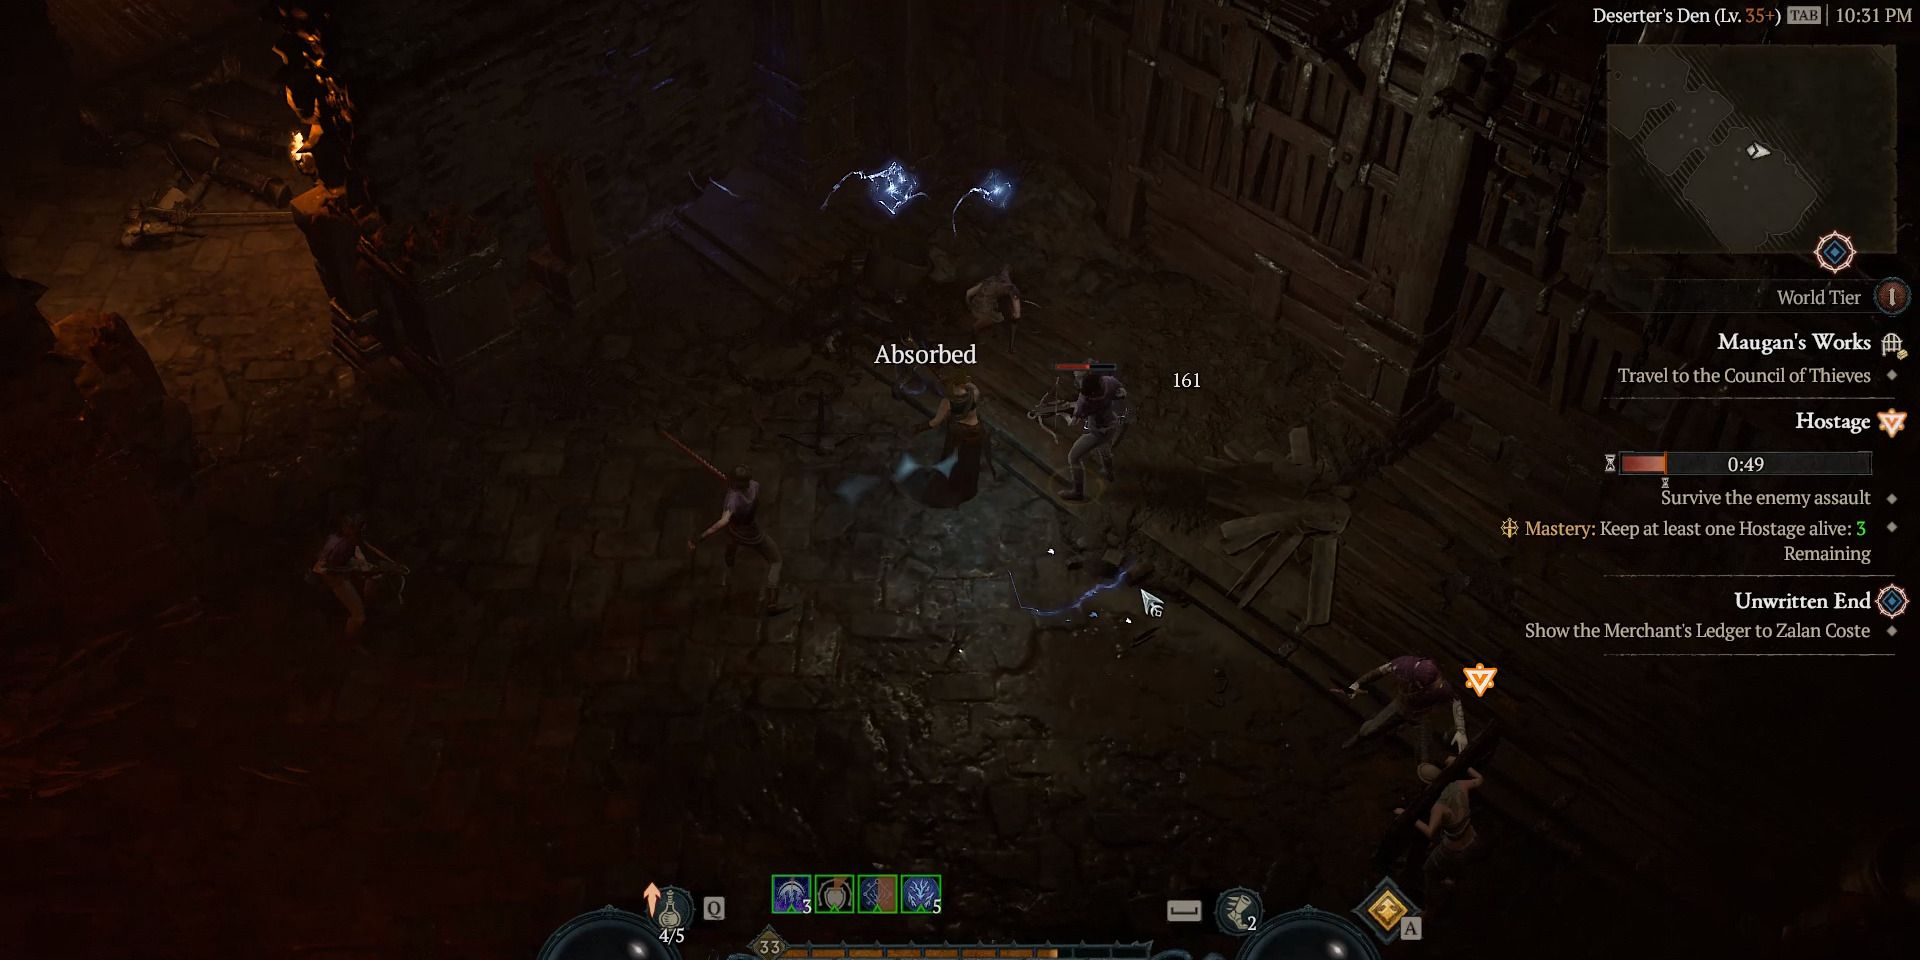 Image of the room with enemies and a few hostages in Maugan's Works in Diablo 4.